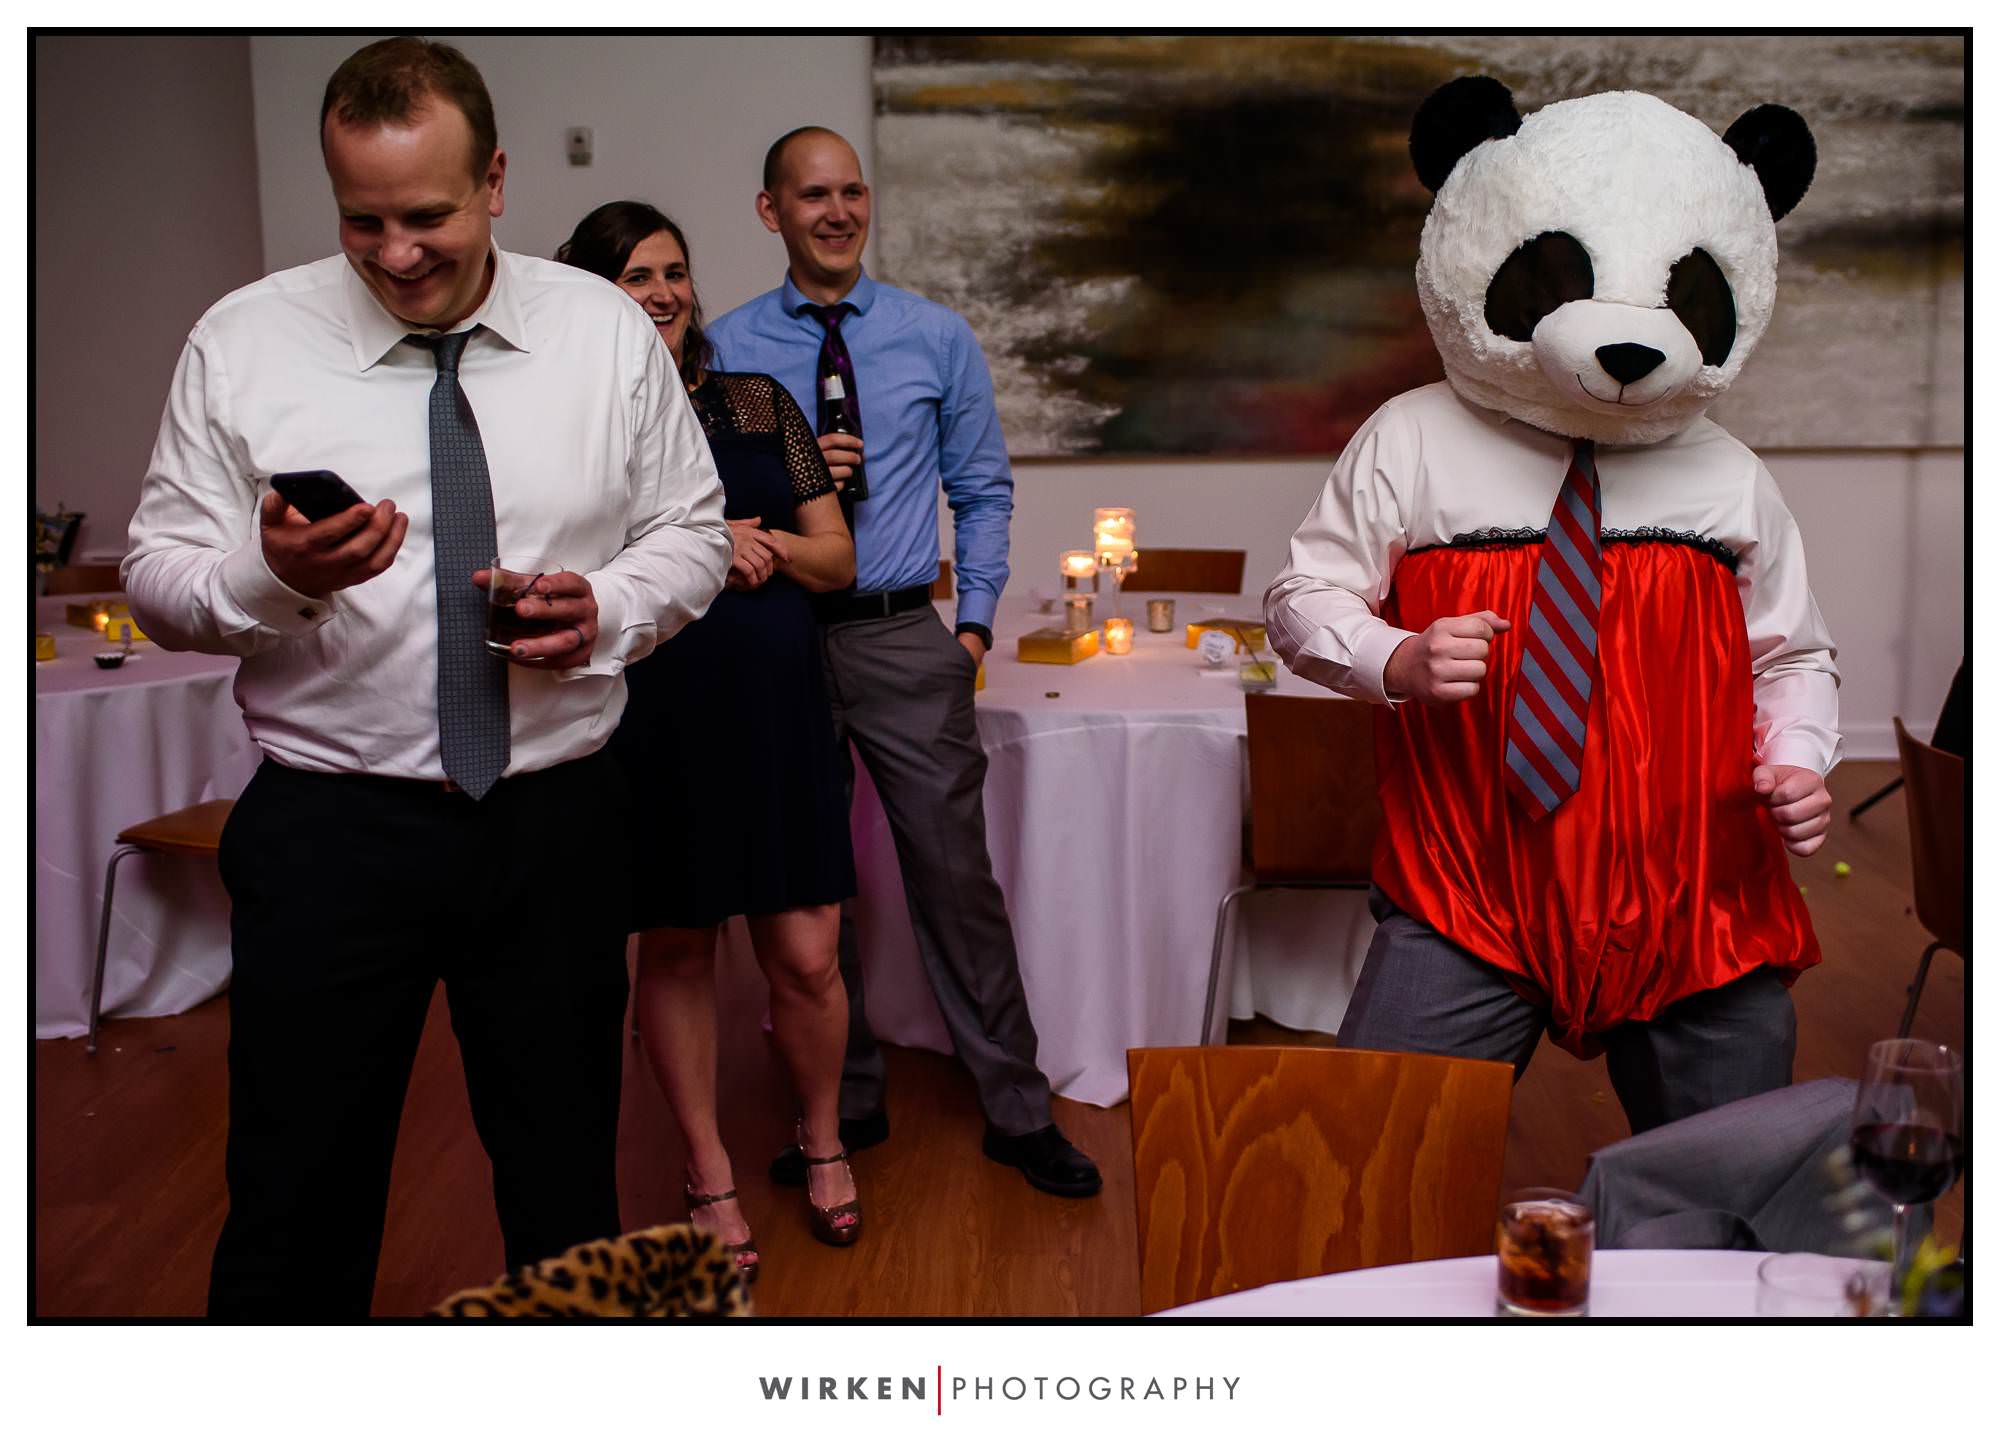 A panda costume at Leah and Ryans The Gallery Center Wedding Reception